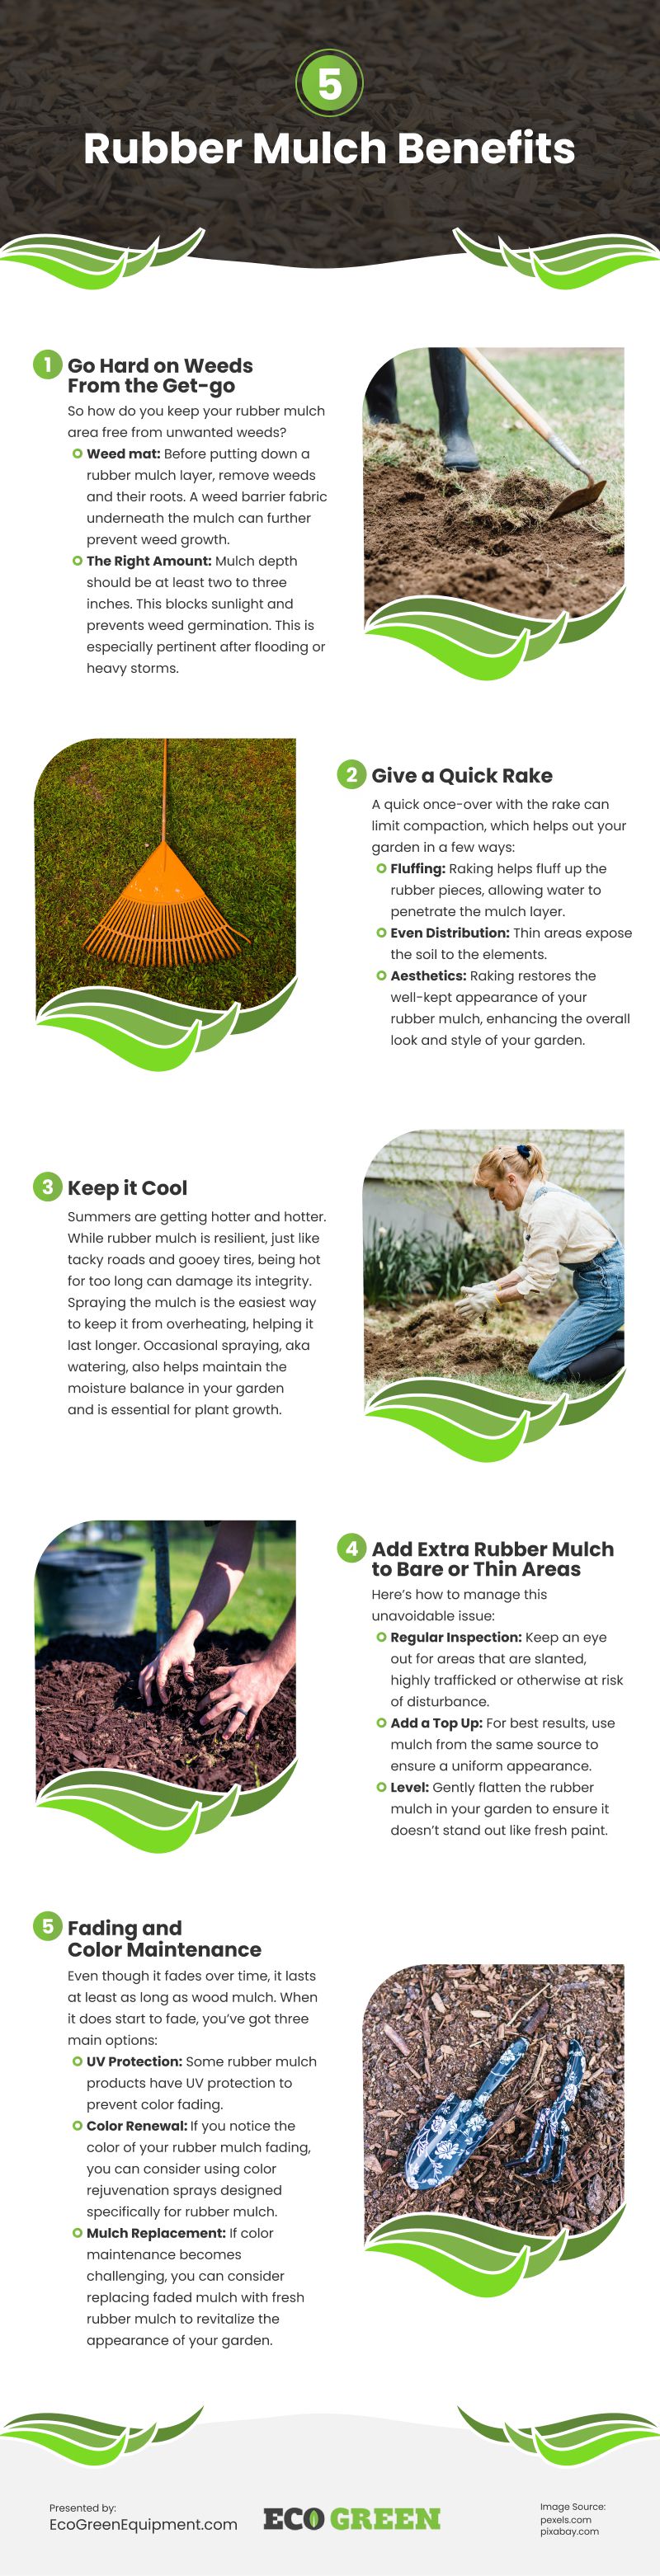 5 Rubber Mulch Benefits Infographic
